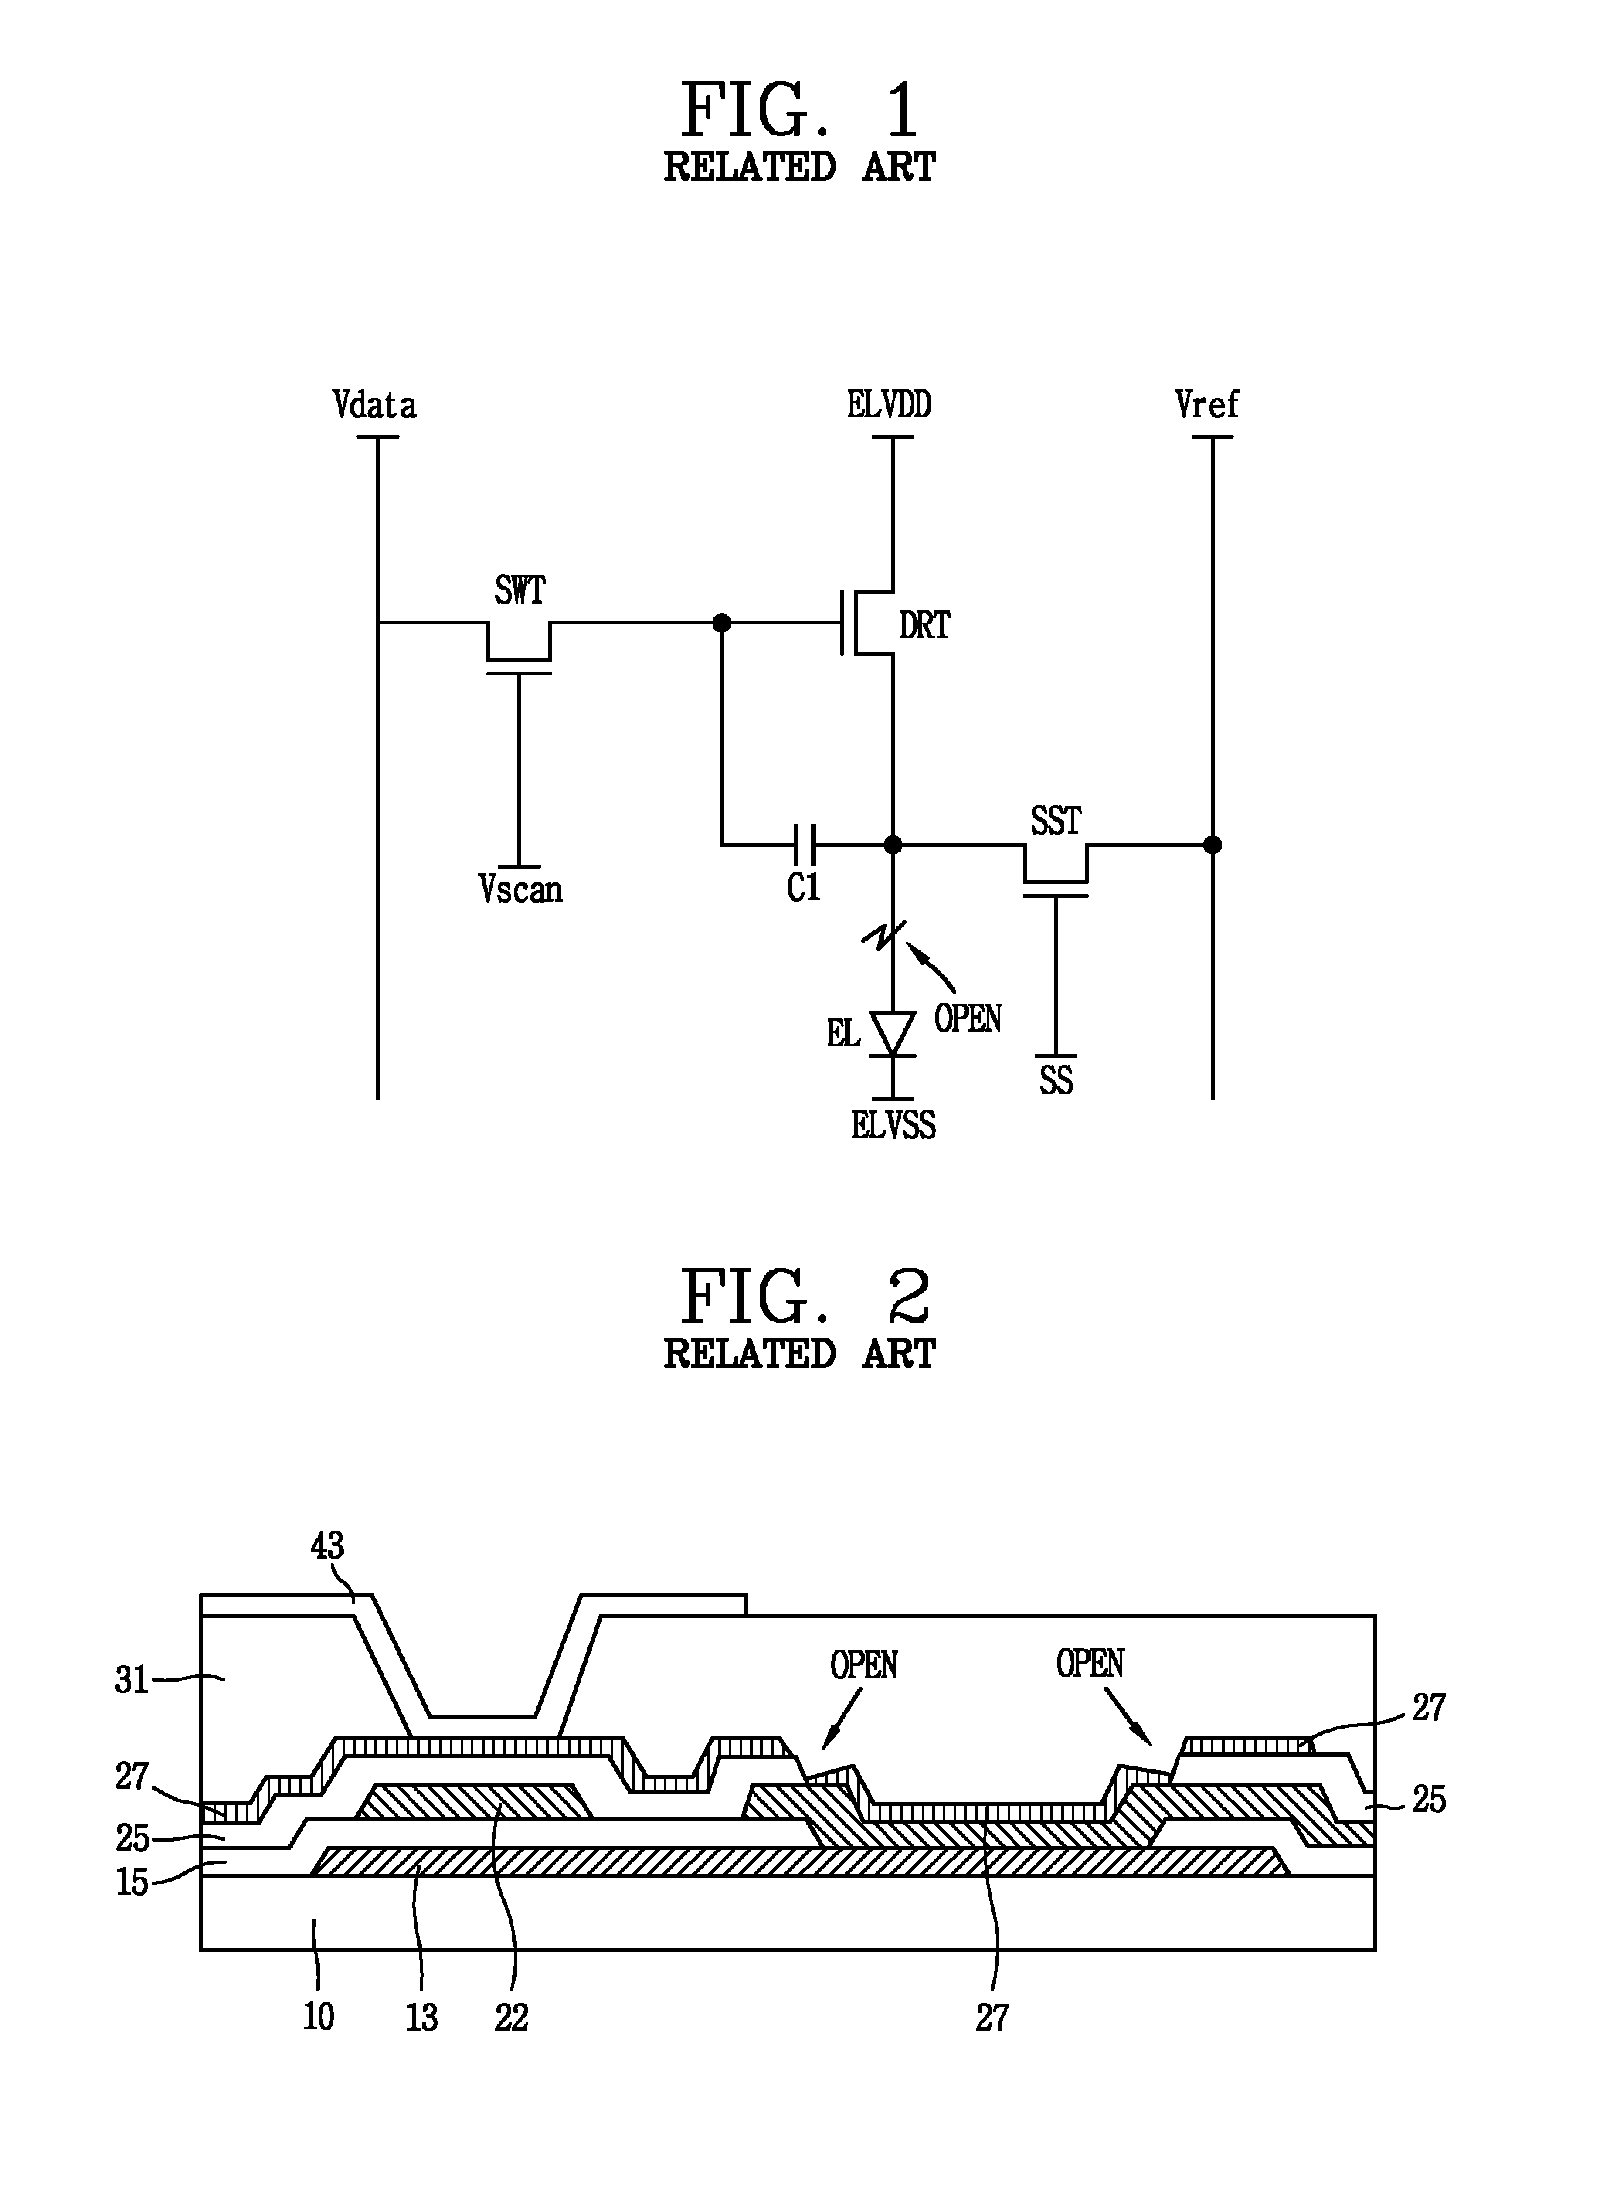 Organic light emitting diode display, and fabricating and inspecting methods thereof